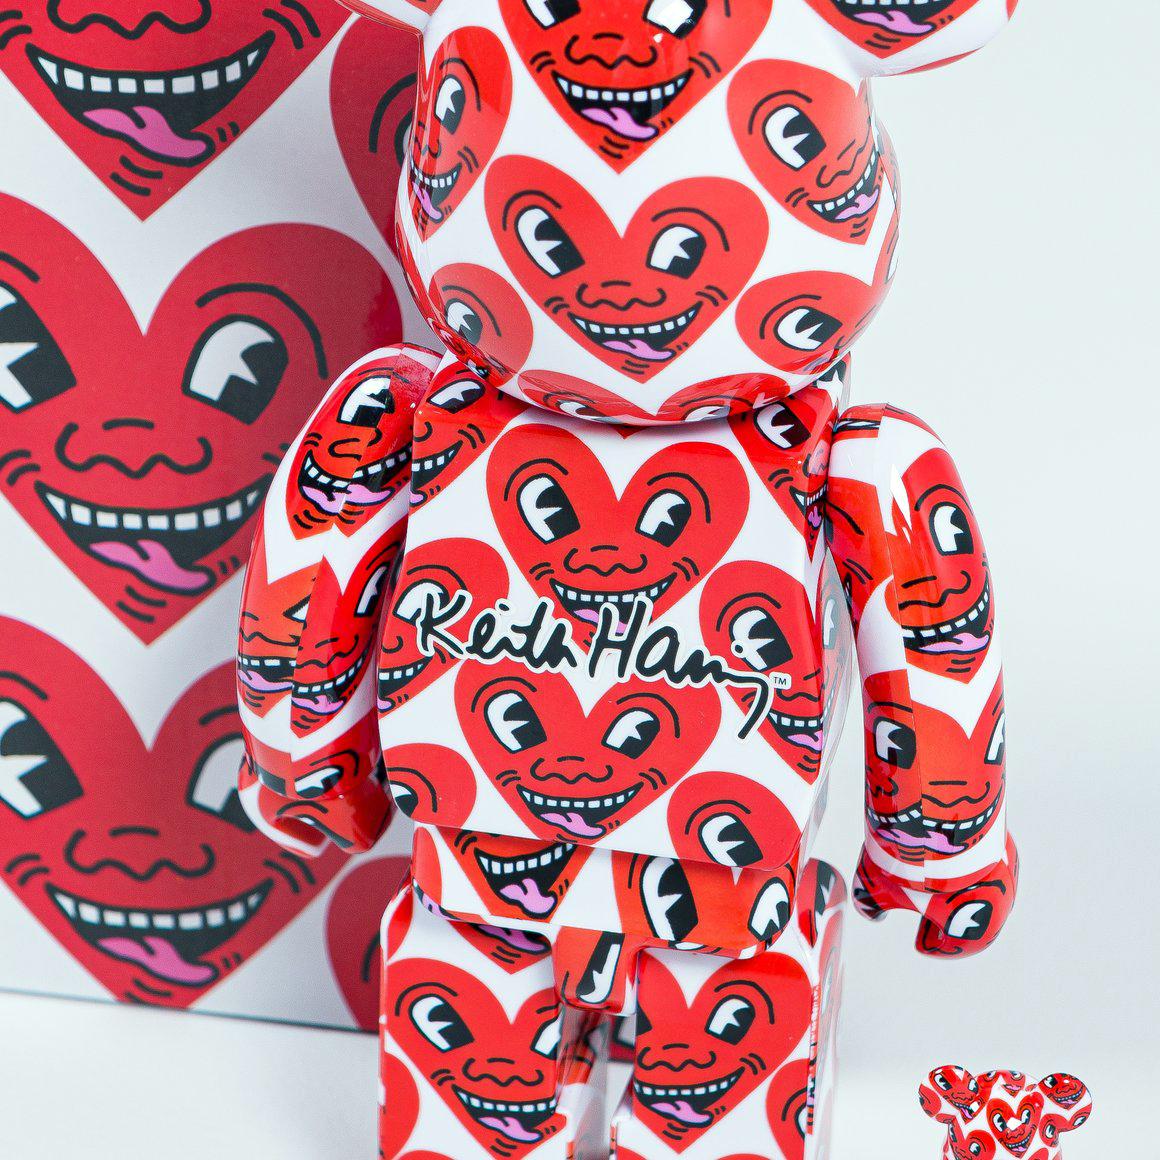 Bearbrick - KEITH HARING (V6) 400% & 100%
Date of creation: 2020
Medium: Vinyl figure
Edition: Open
Size: 28 x 10 x 10 cm
Condition: In mint conditions, inside its original package
Observations:
Vinyl figure published in 2020 by Medicom Toys. Sent